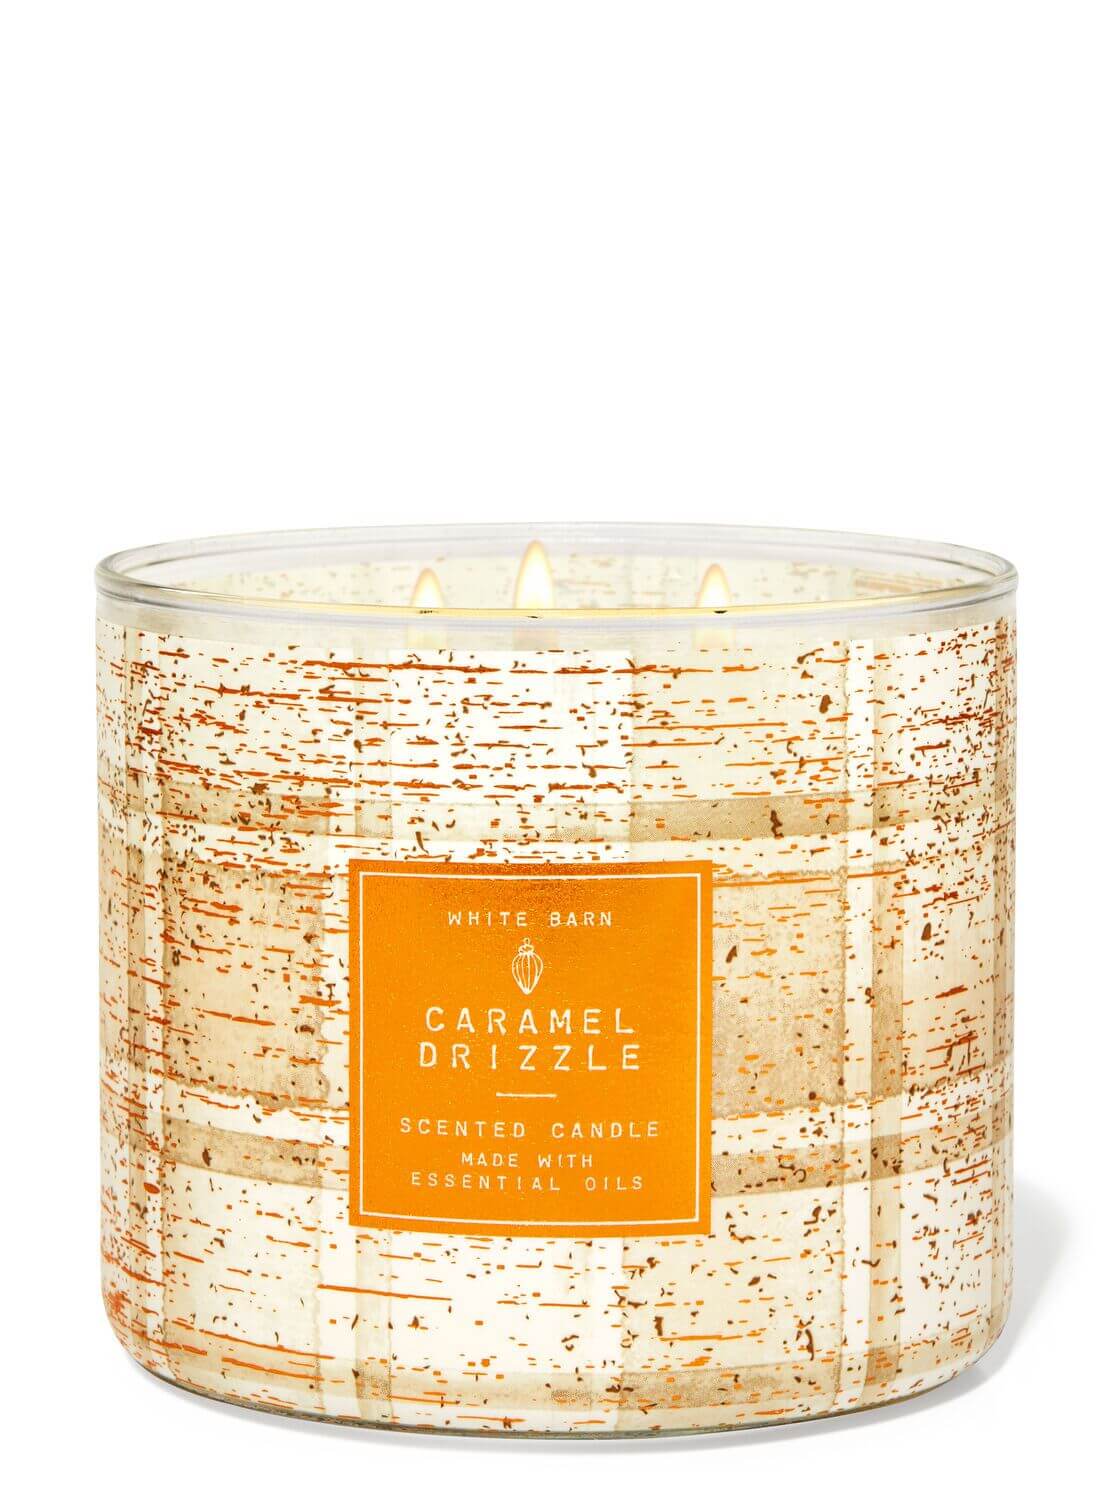 Bath & Body works Caramel Drizzle 3-Wick Candle